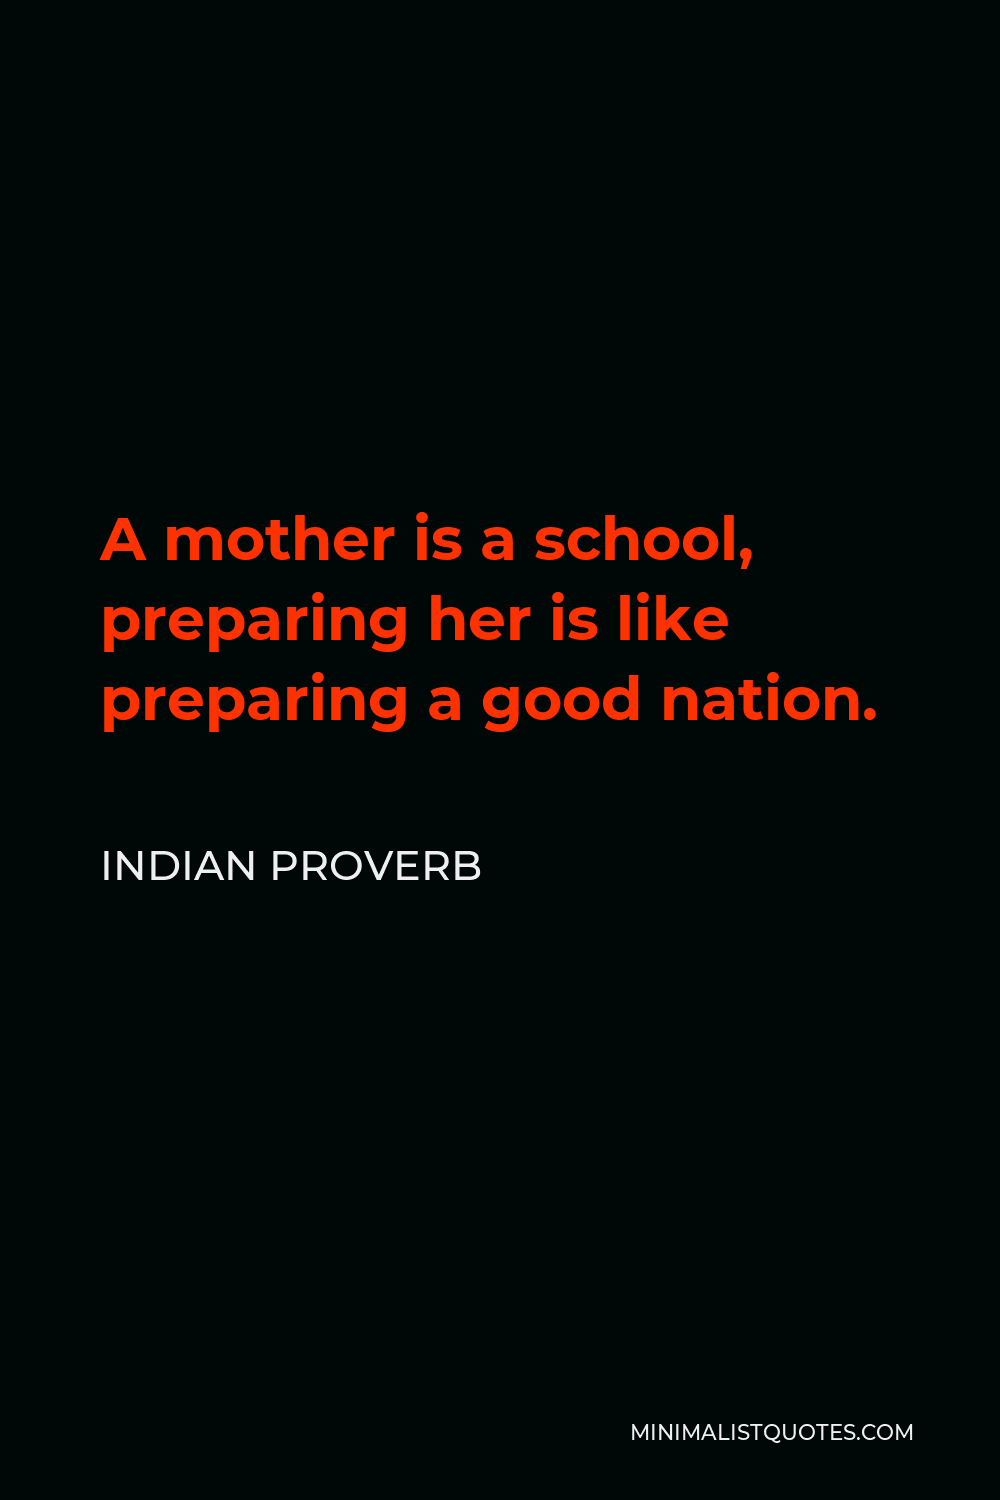 Indian Proverb Quote - A mother is a school, preparing her is like preparing a good nation.